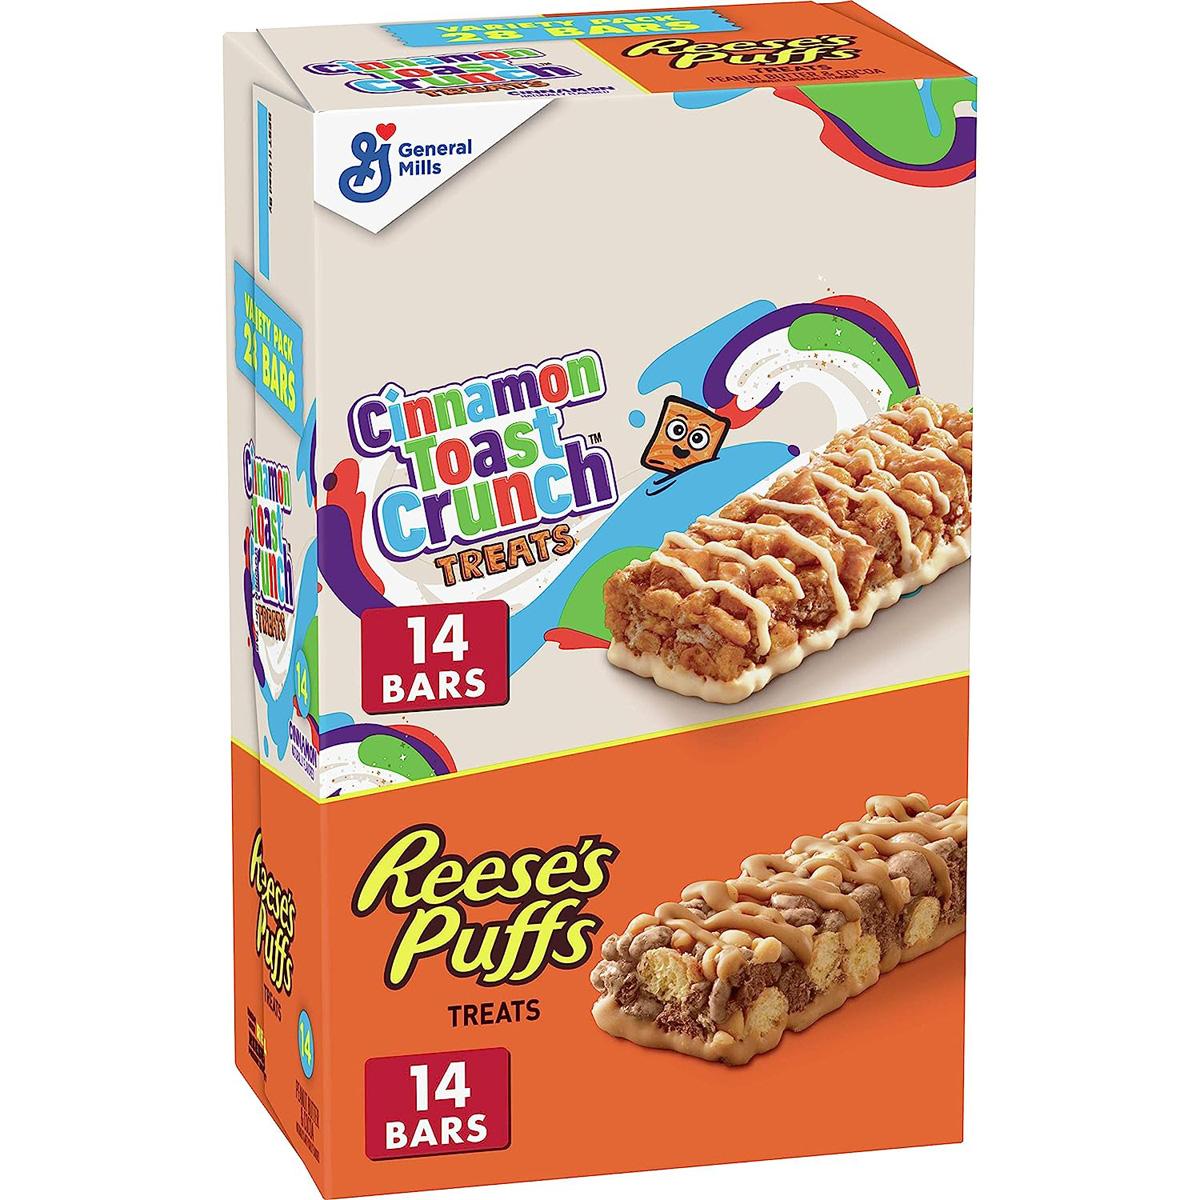 Reeses Puffs and Cinnamon Toast Crunch Cereal Treats Bars 28 Pack for $4.54 Shipped